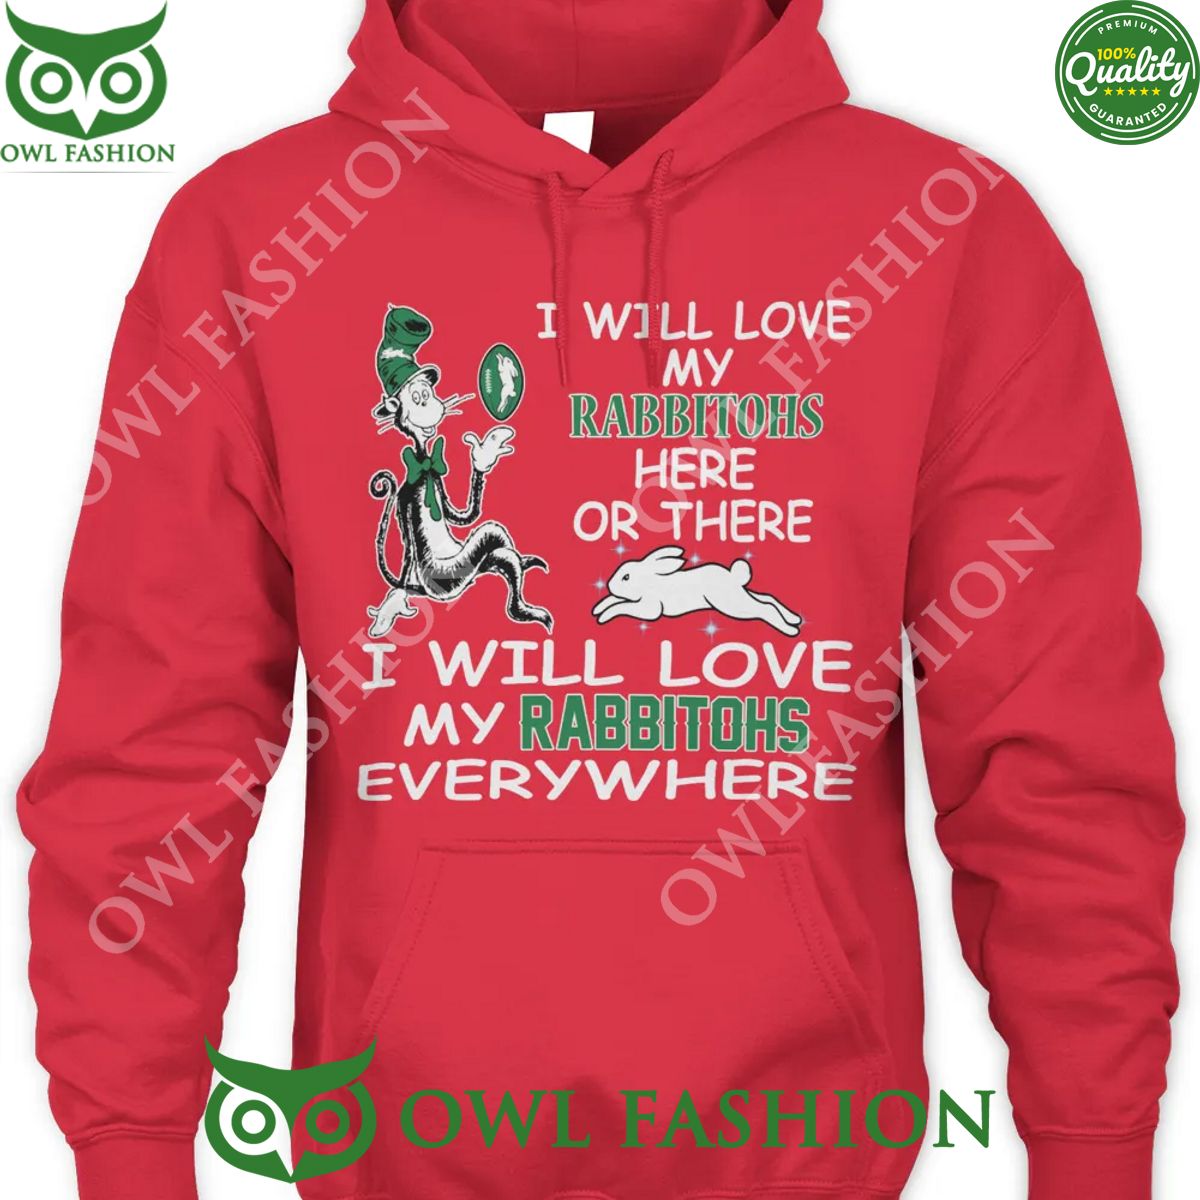 nrl i will love my rabbitohs here or there i will love rabbitohs everywhere t shirt 1 a9qNb.jpg